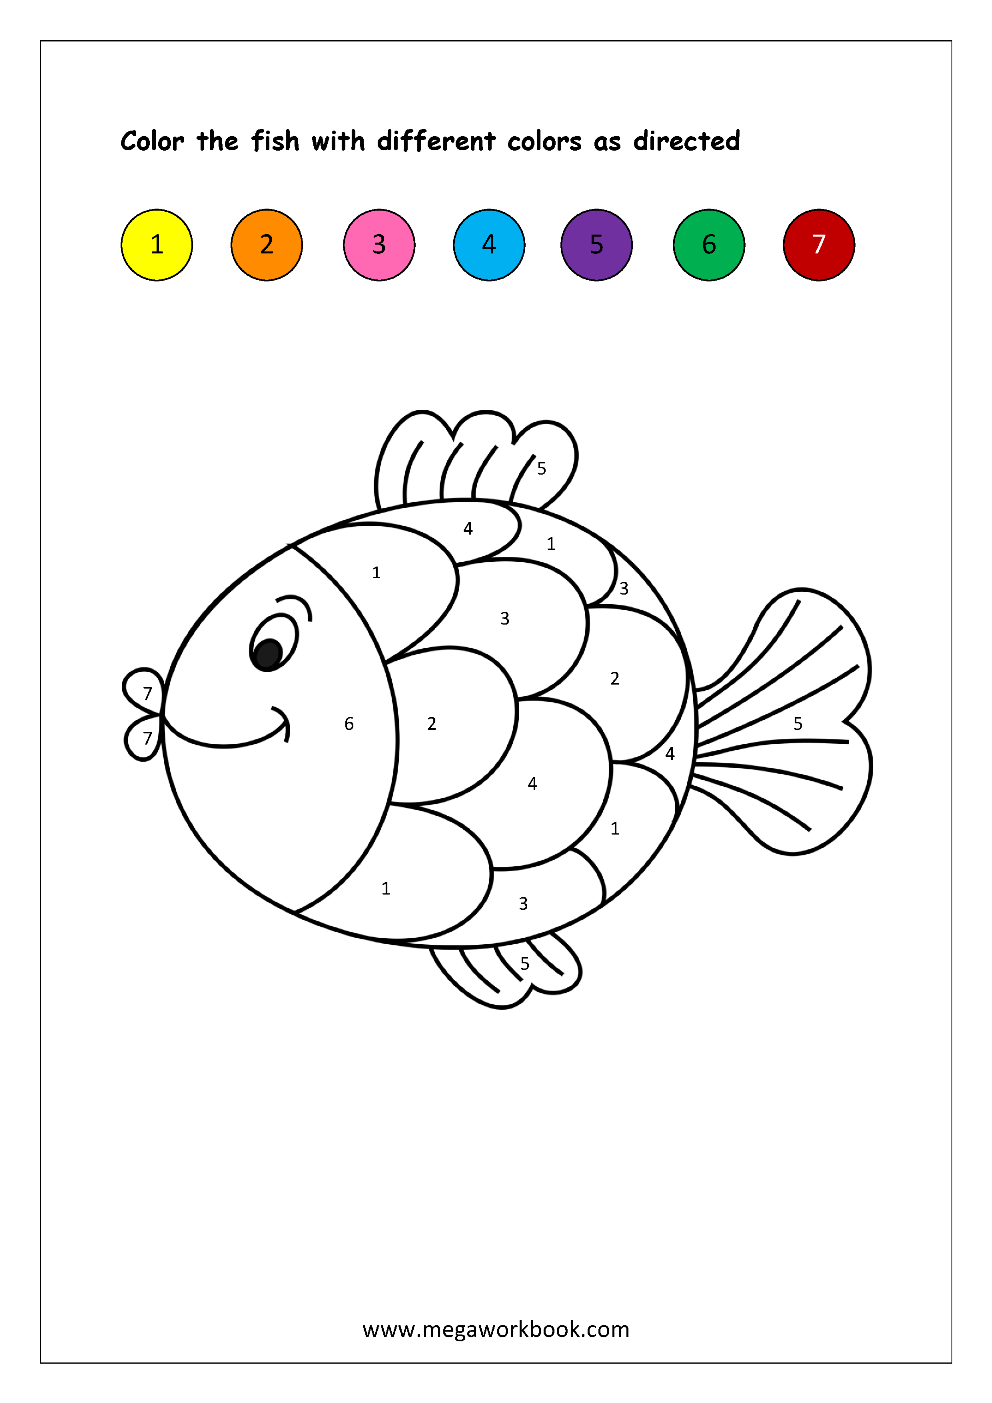 number-printable-images-gallery-category-page-1-printableecom-number-coloring-pages-for